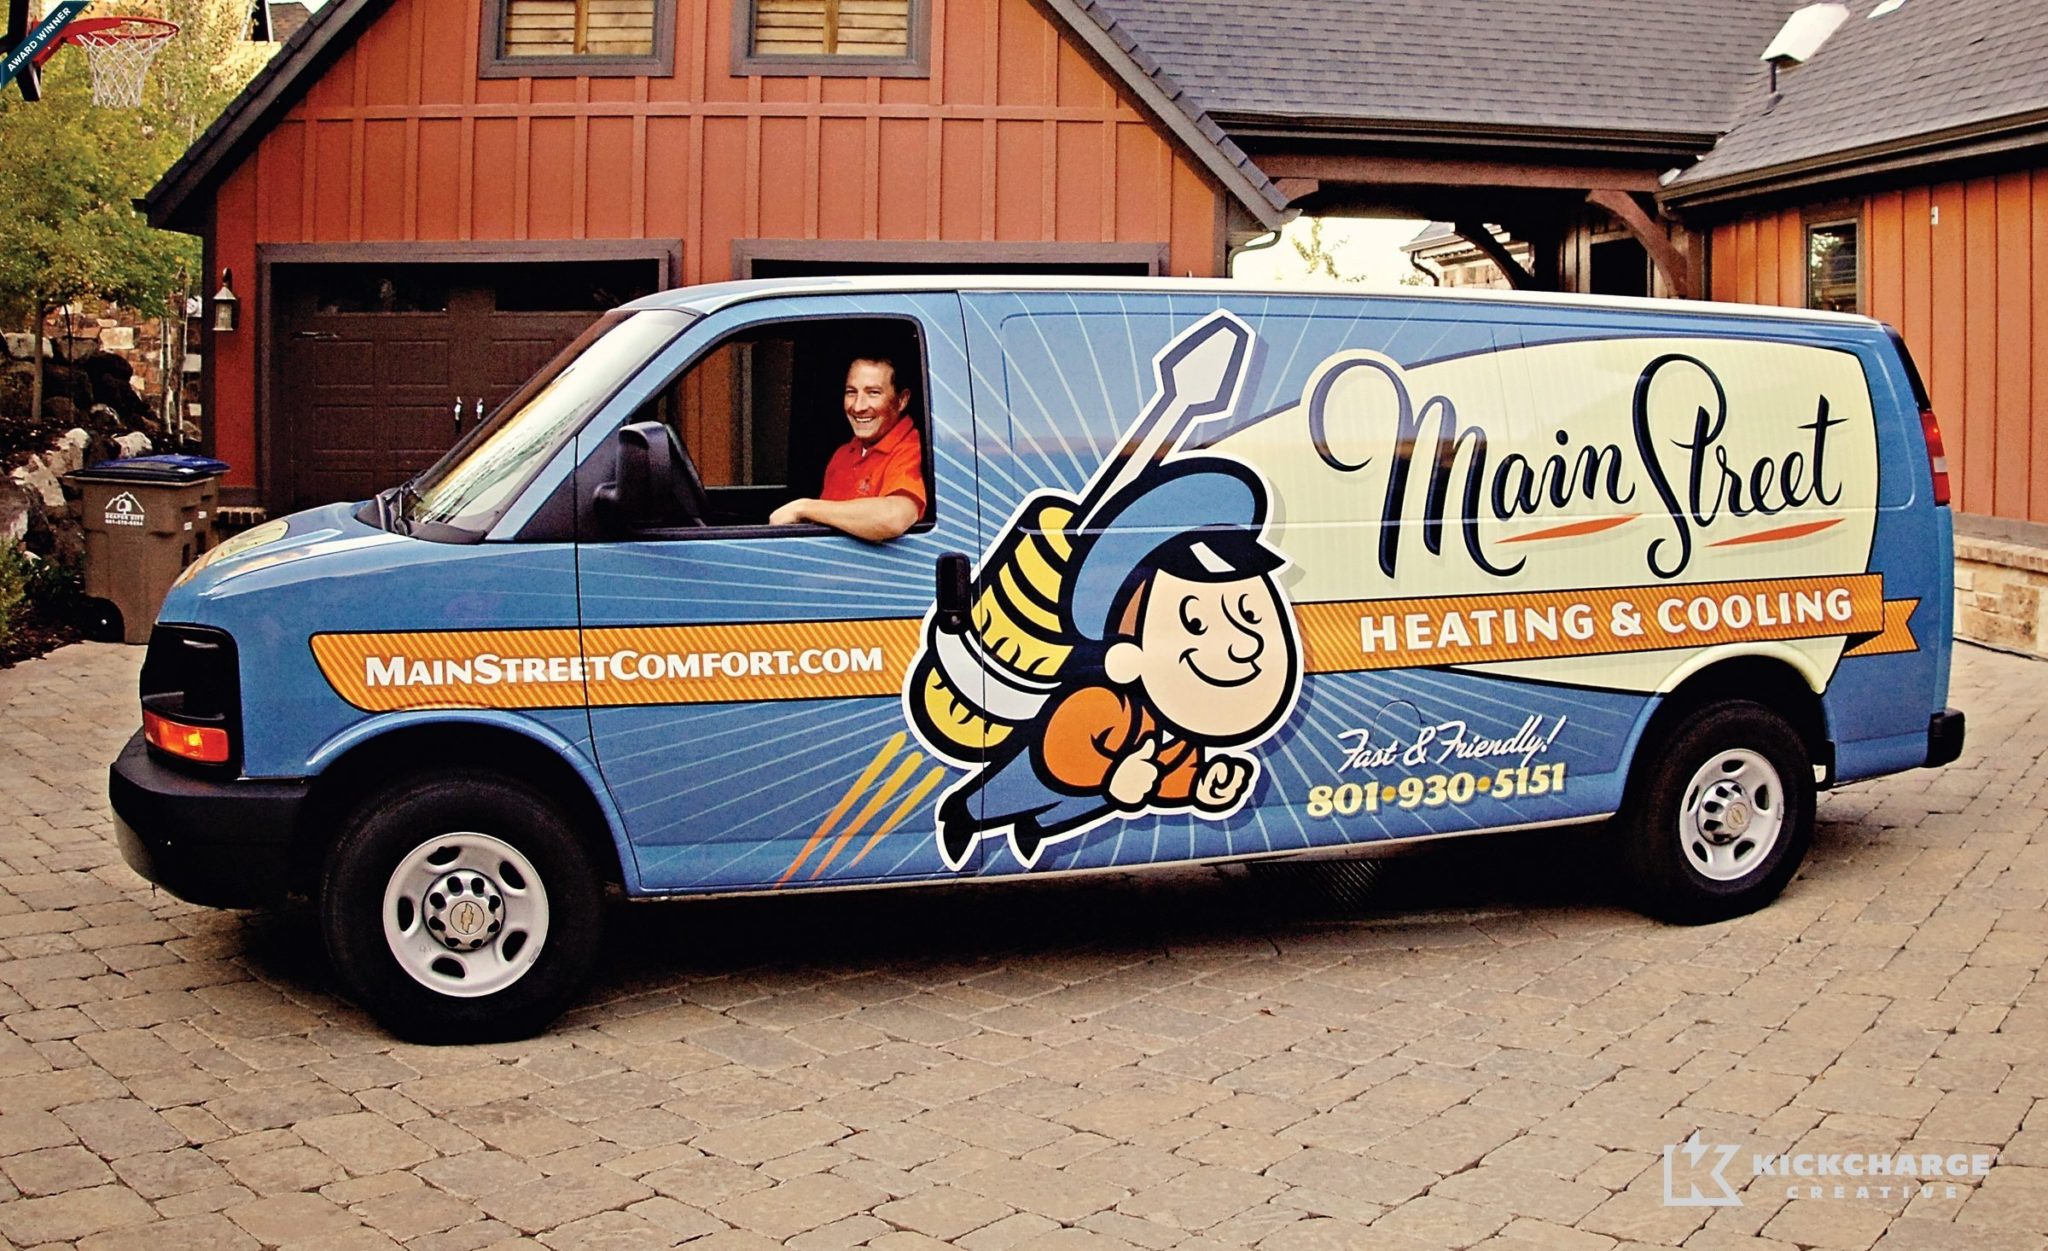 New branding and logo design created for this Utah based startup heating and air conditioning contractor.